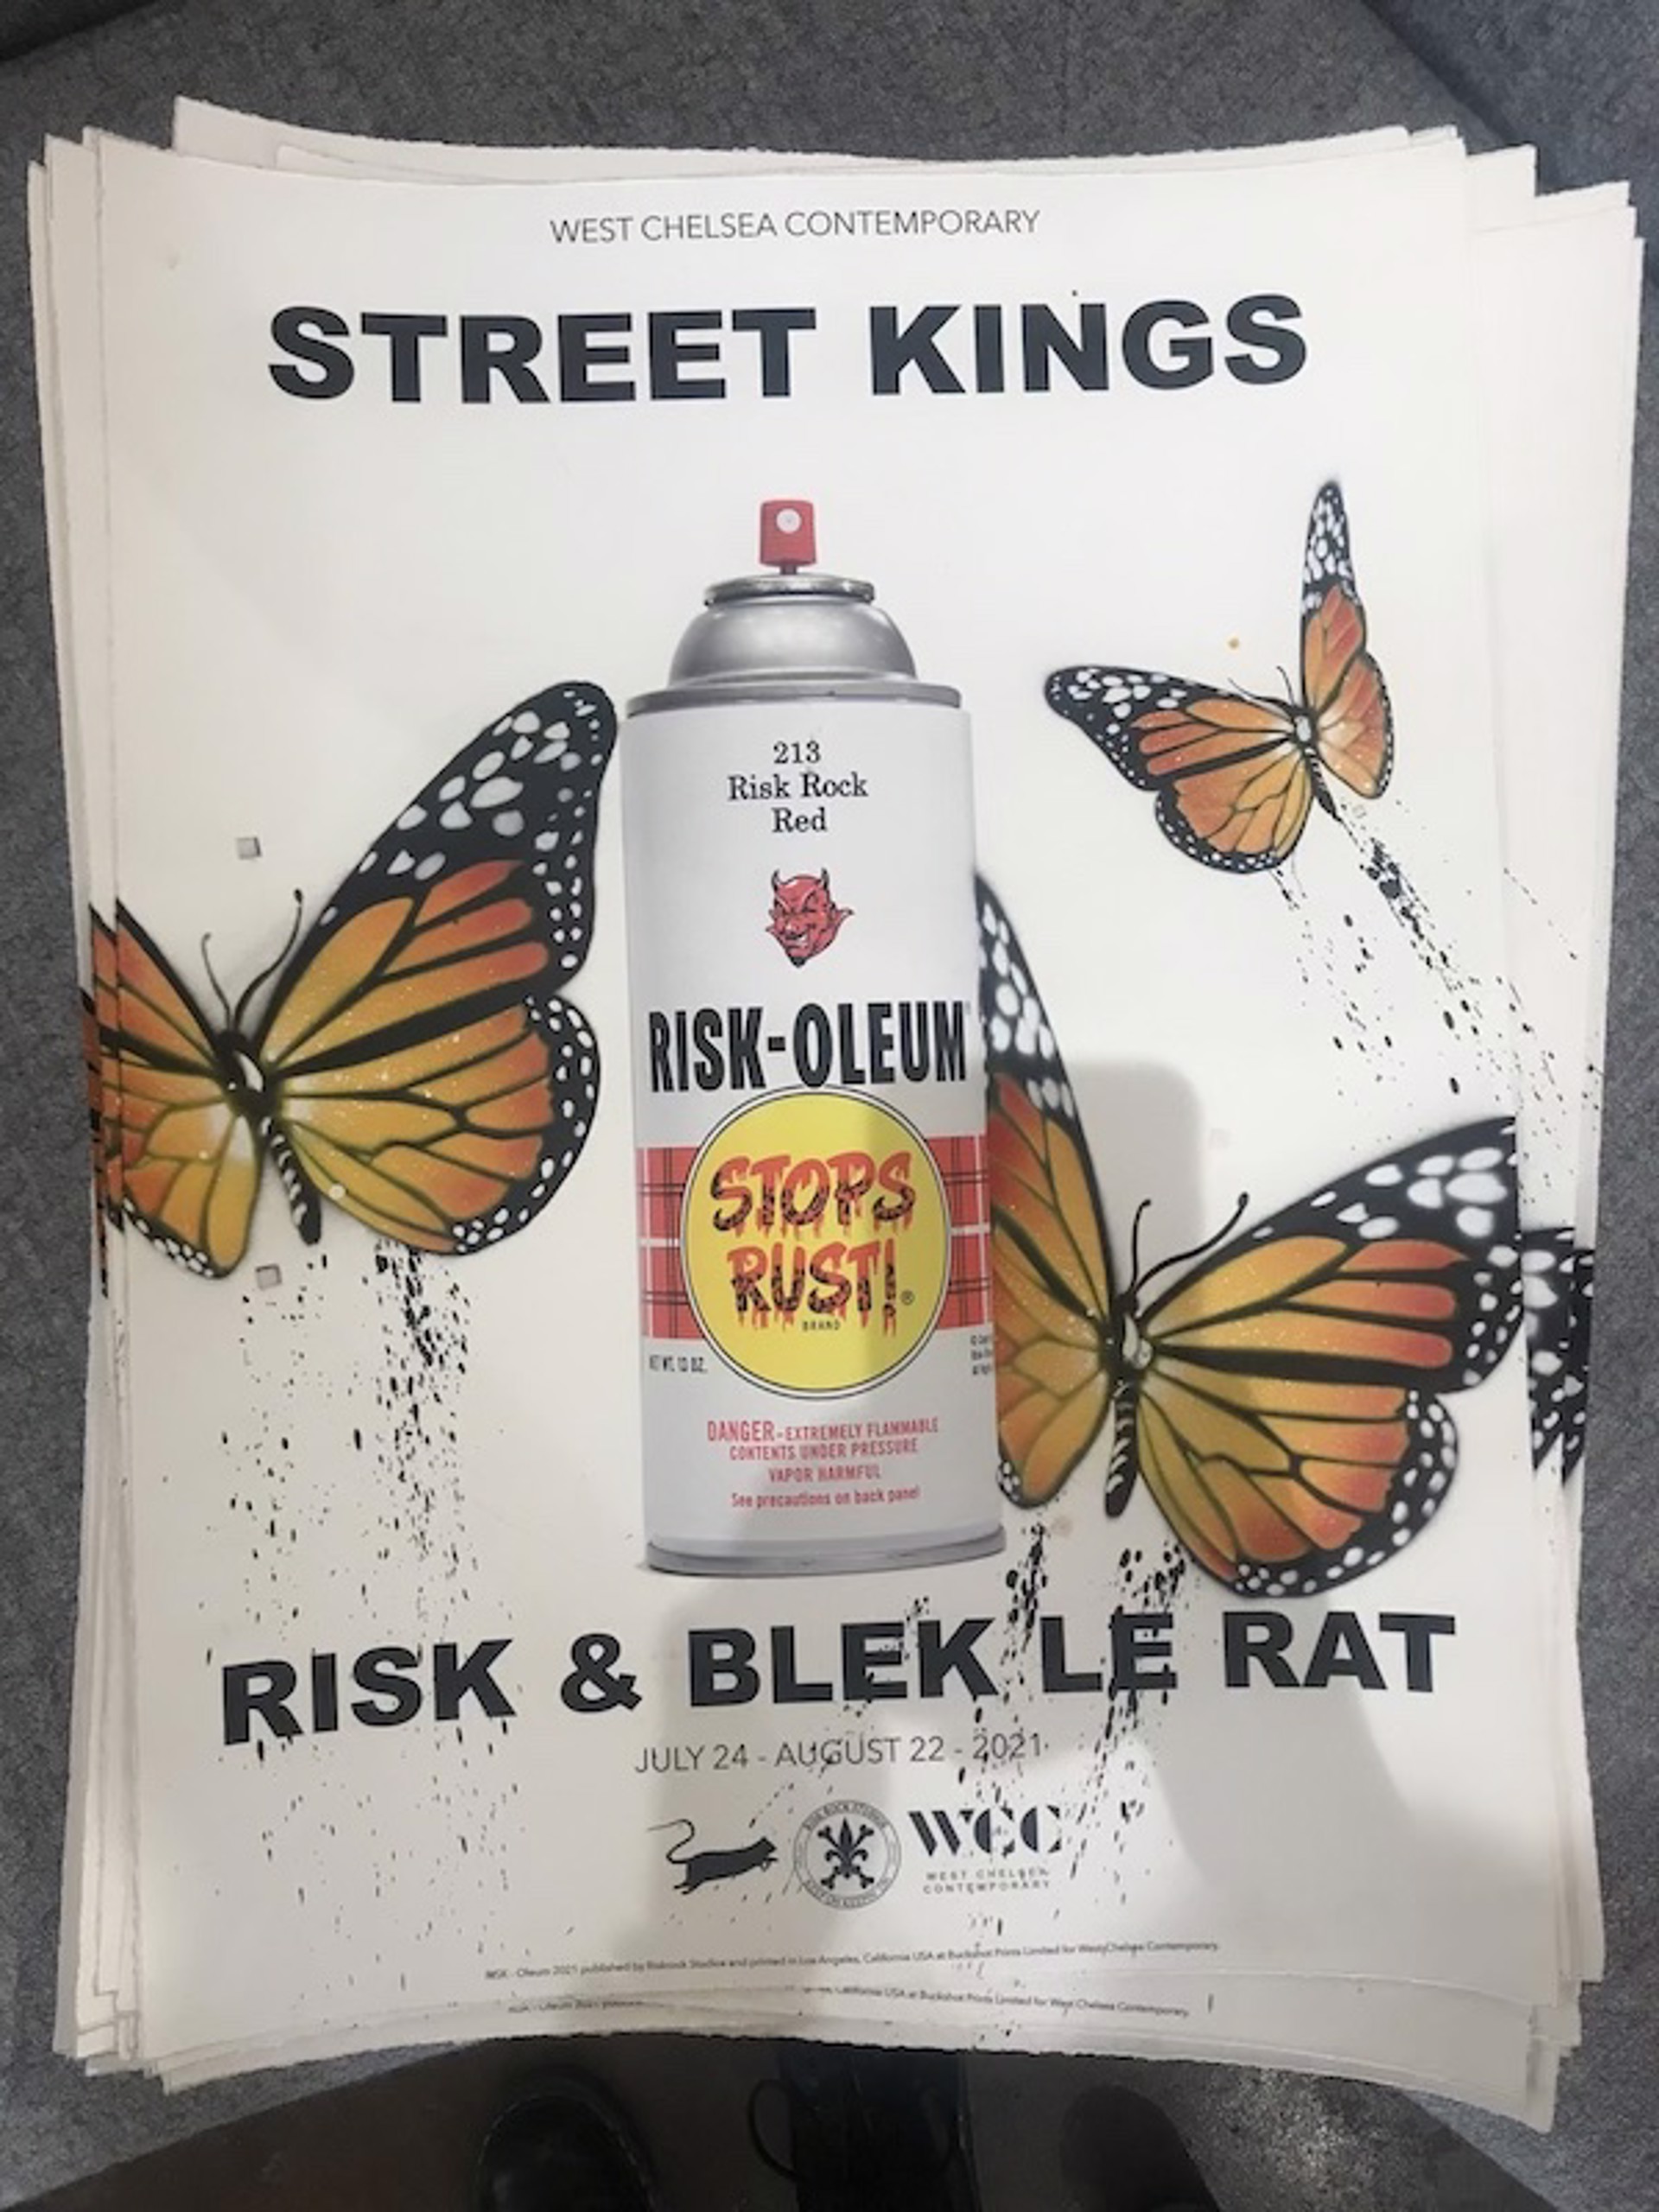 Street Kings Show Print (50/50) by Risk